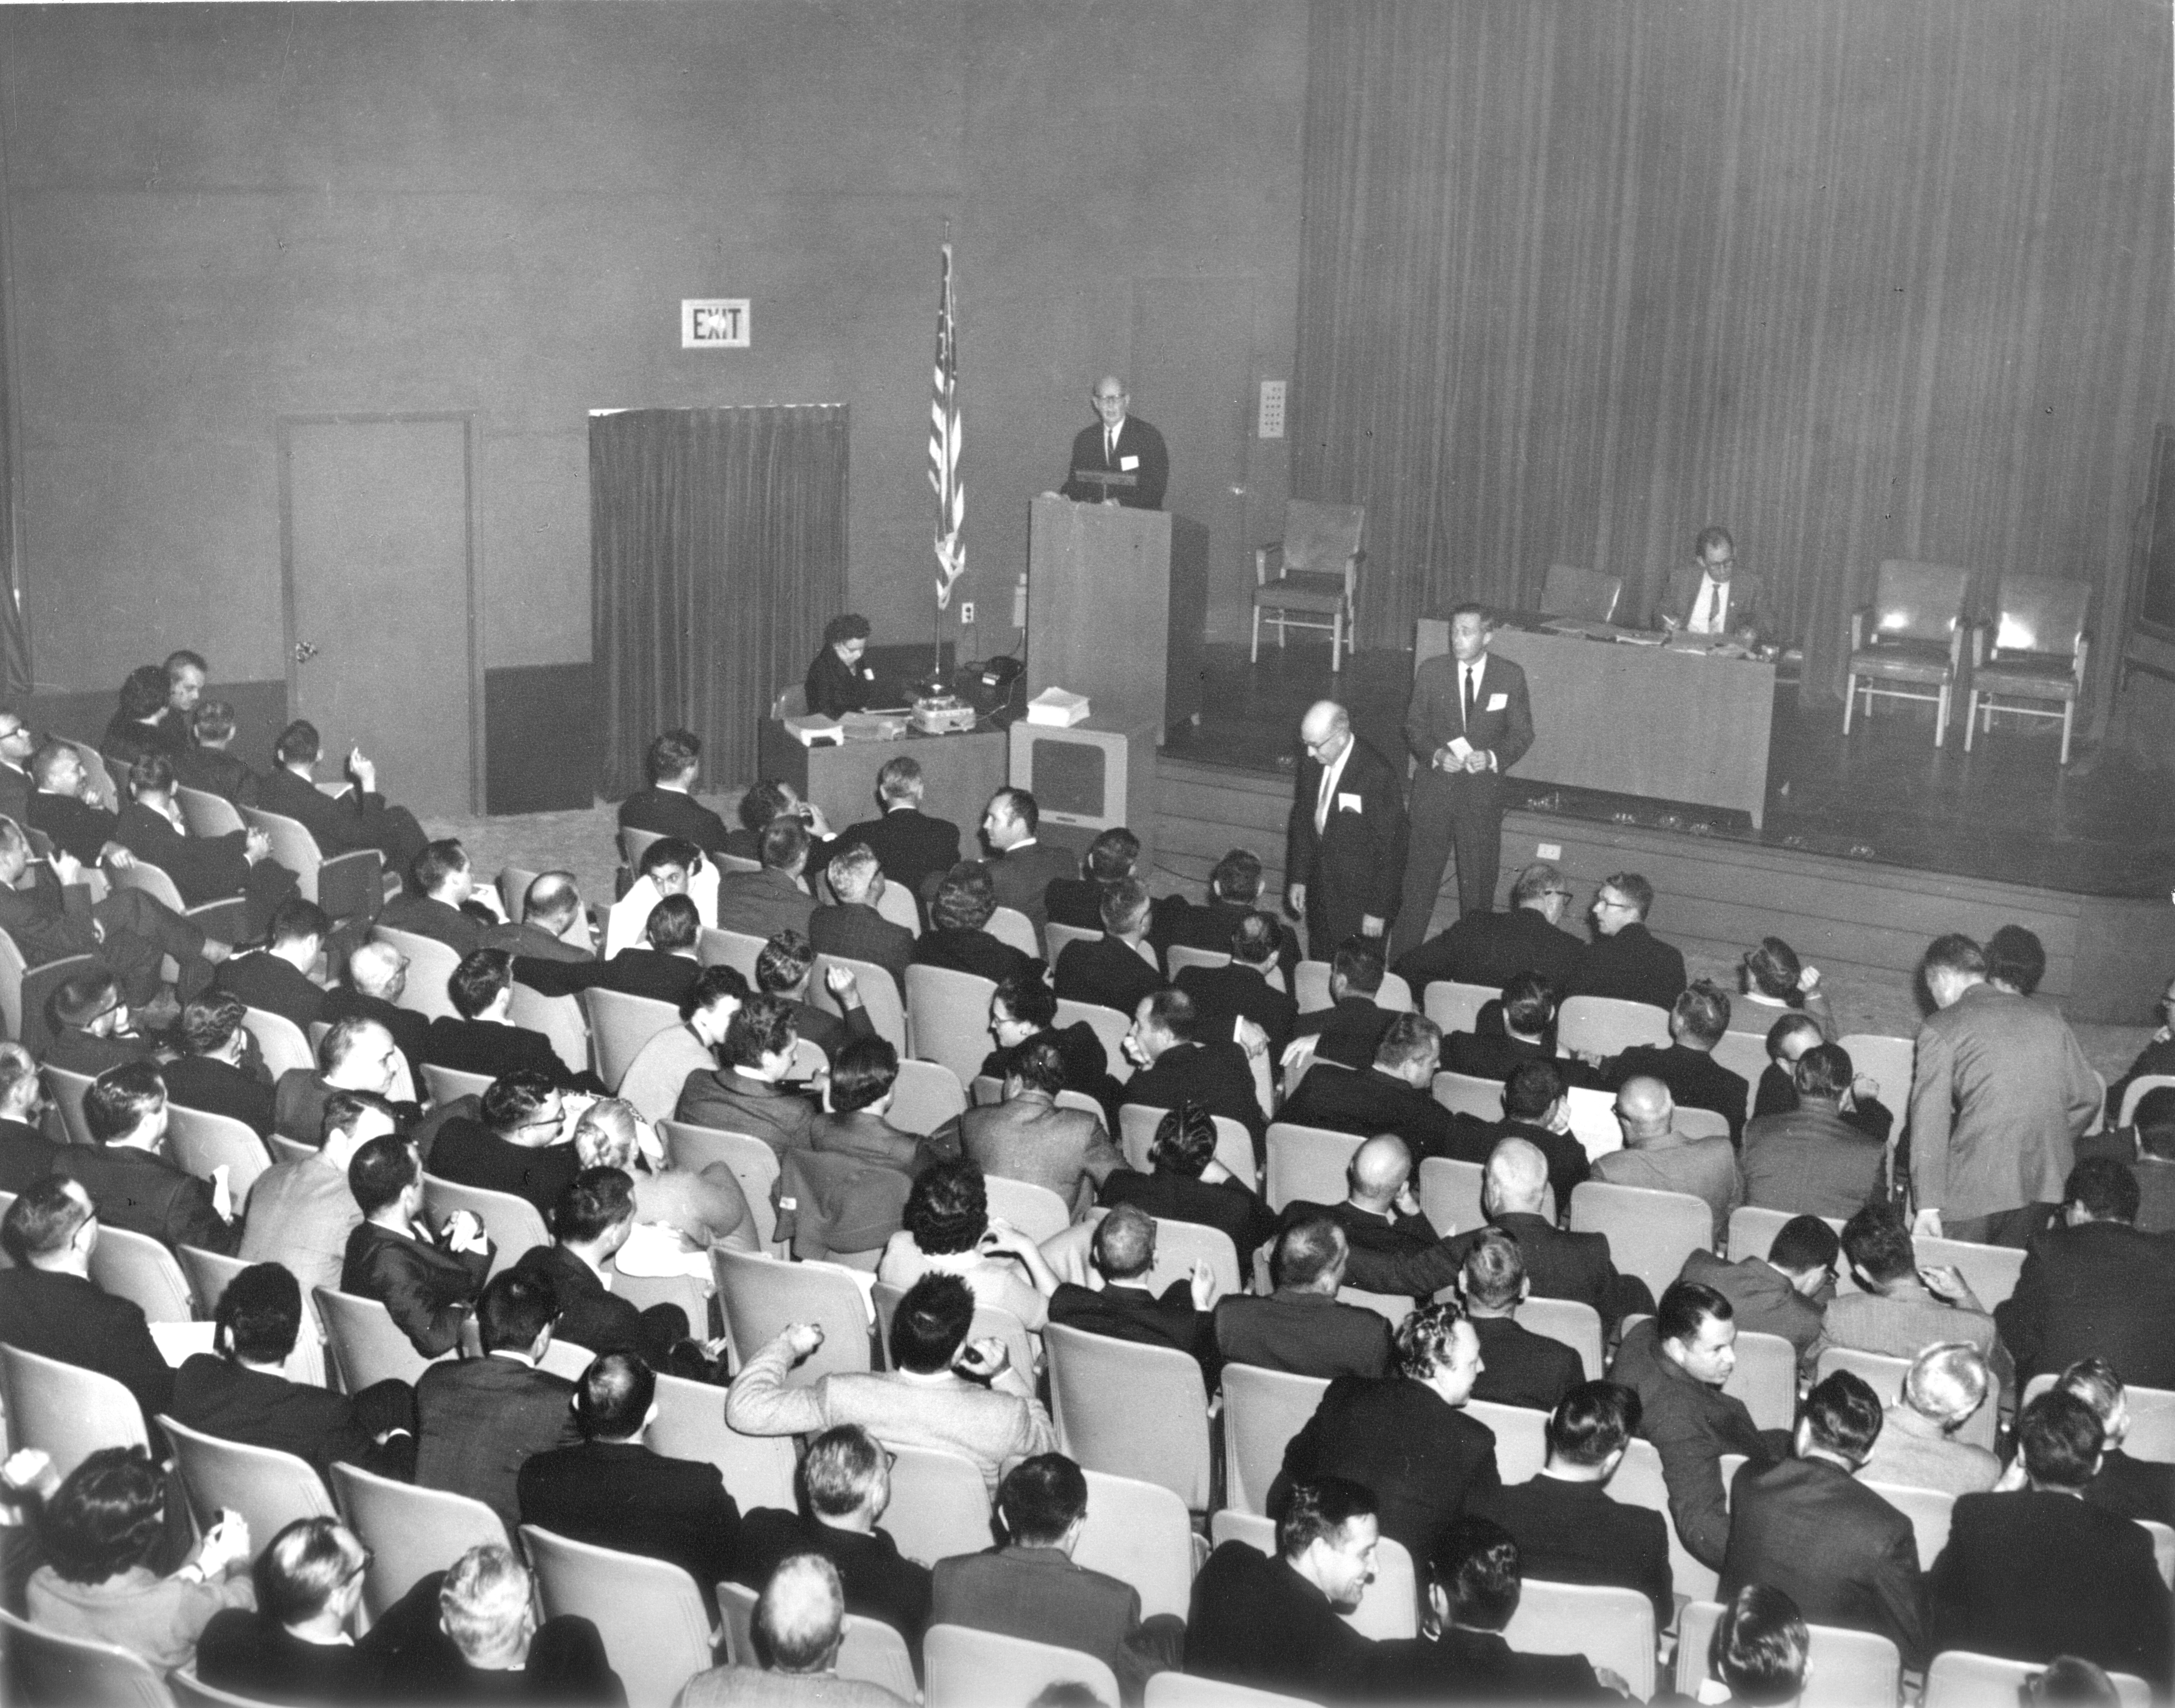 Auditorium, 1961. Harris County Medical Society meeting in the auditorium in the Jesse H. Jones Library Building. IC001 HAM-TMC Library records (OV 100), IC098 HAM-TMC Library Historical Photograph Collection (P-3359, OV 93), McGovern Historical Center